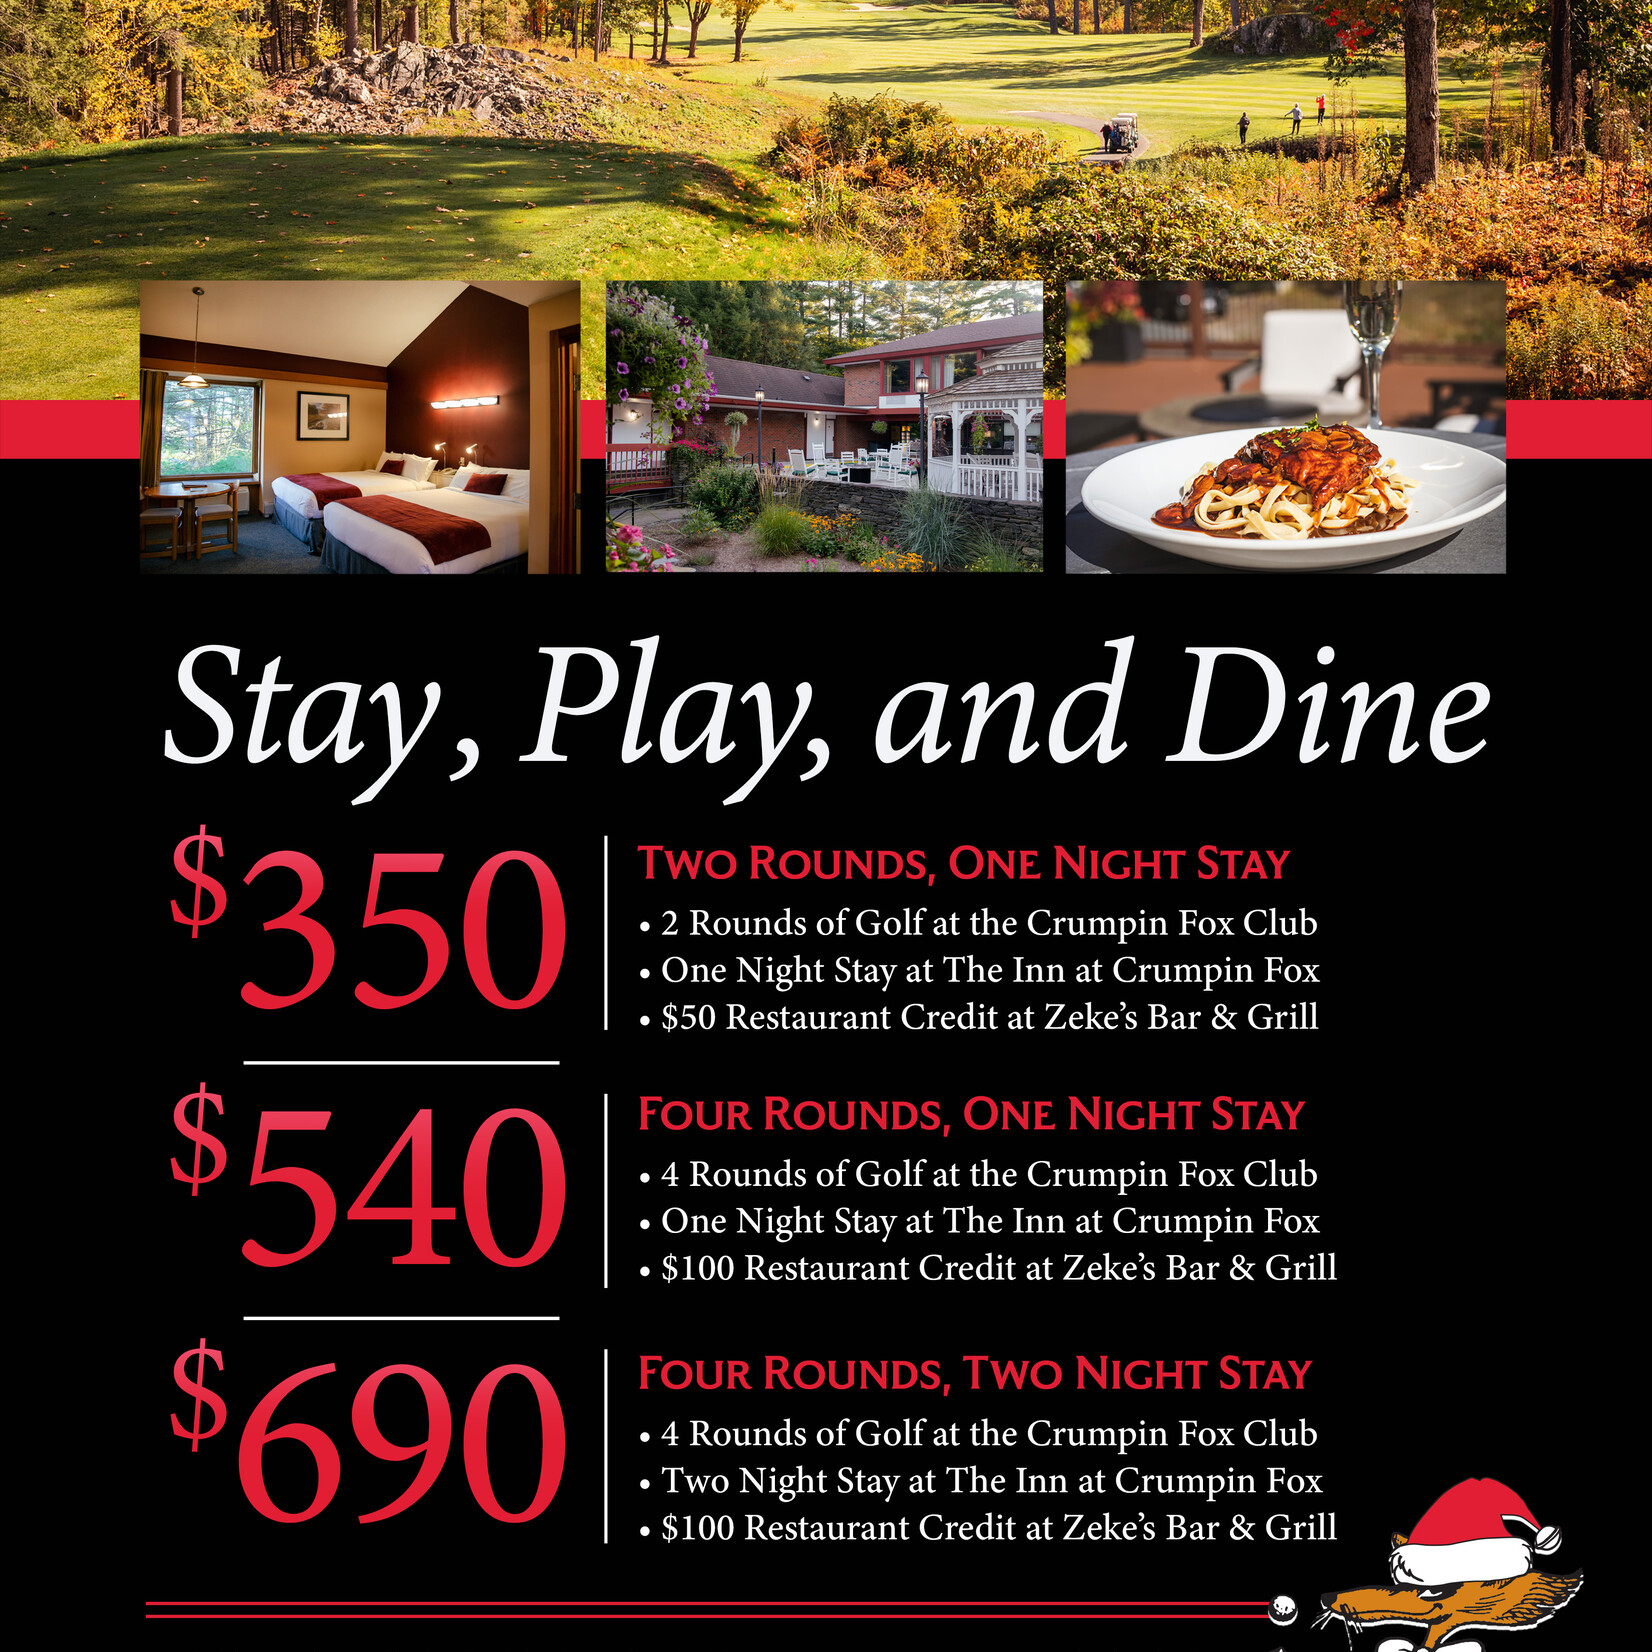 Crumpin Fox Stay, Play & Dine Package - 2 Rounds, 1 Night Stay & $50 Restaurant Voucher